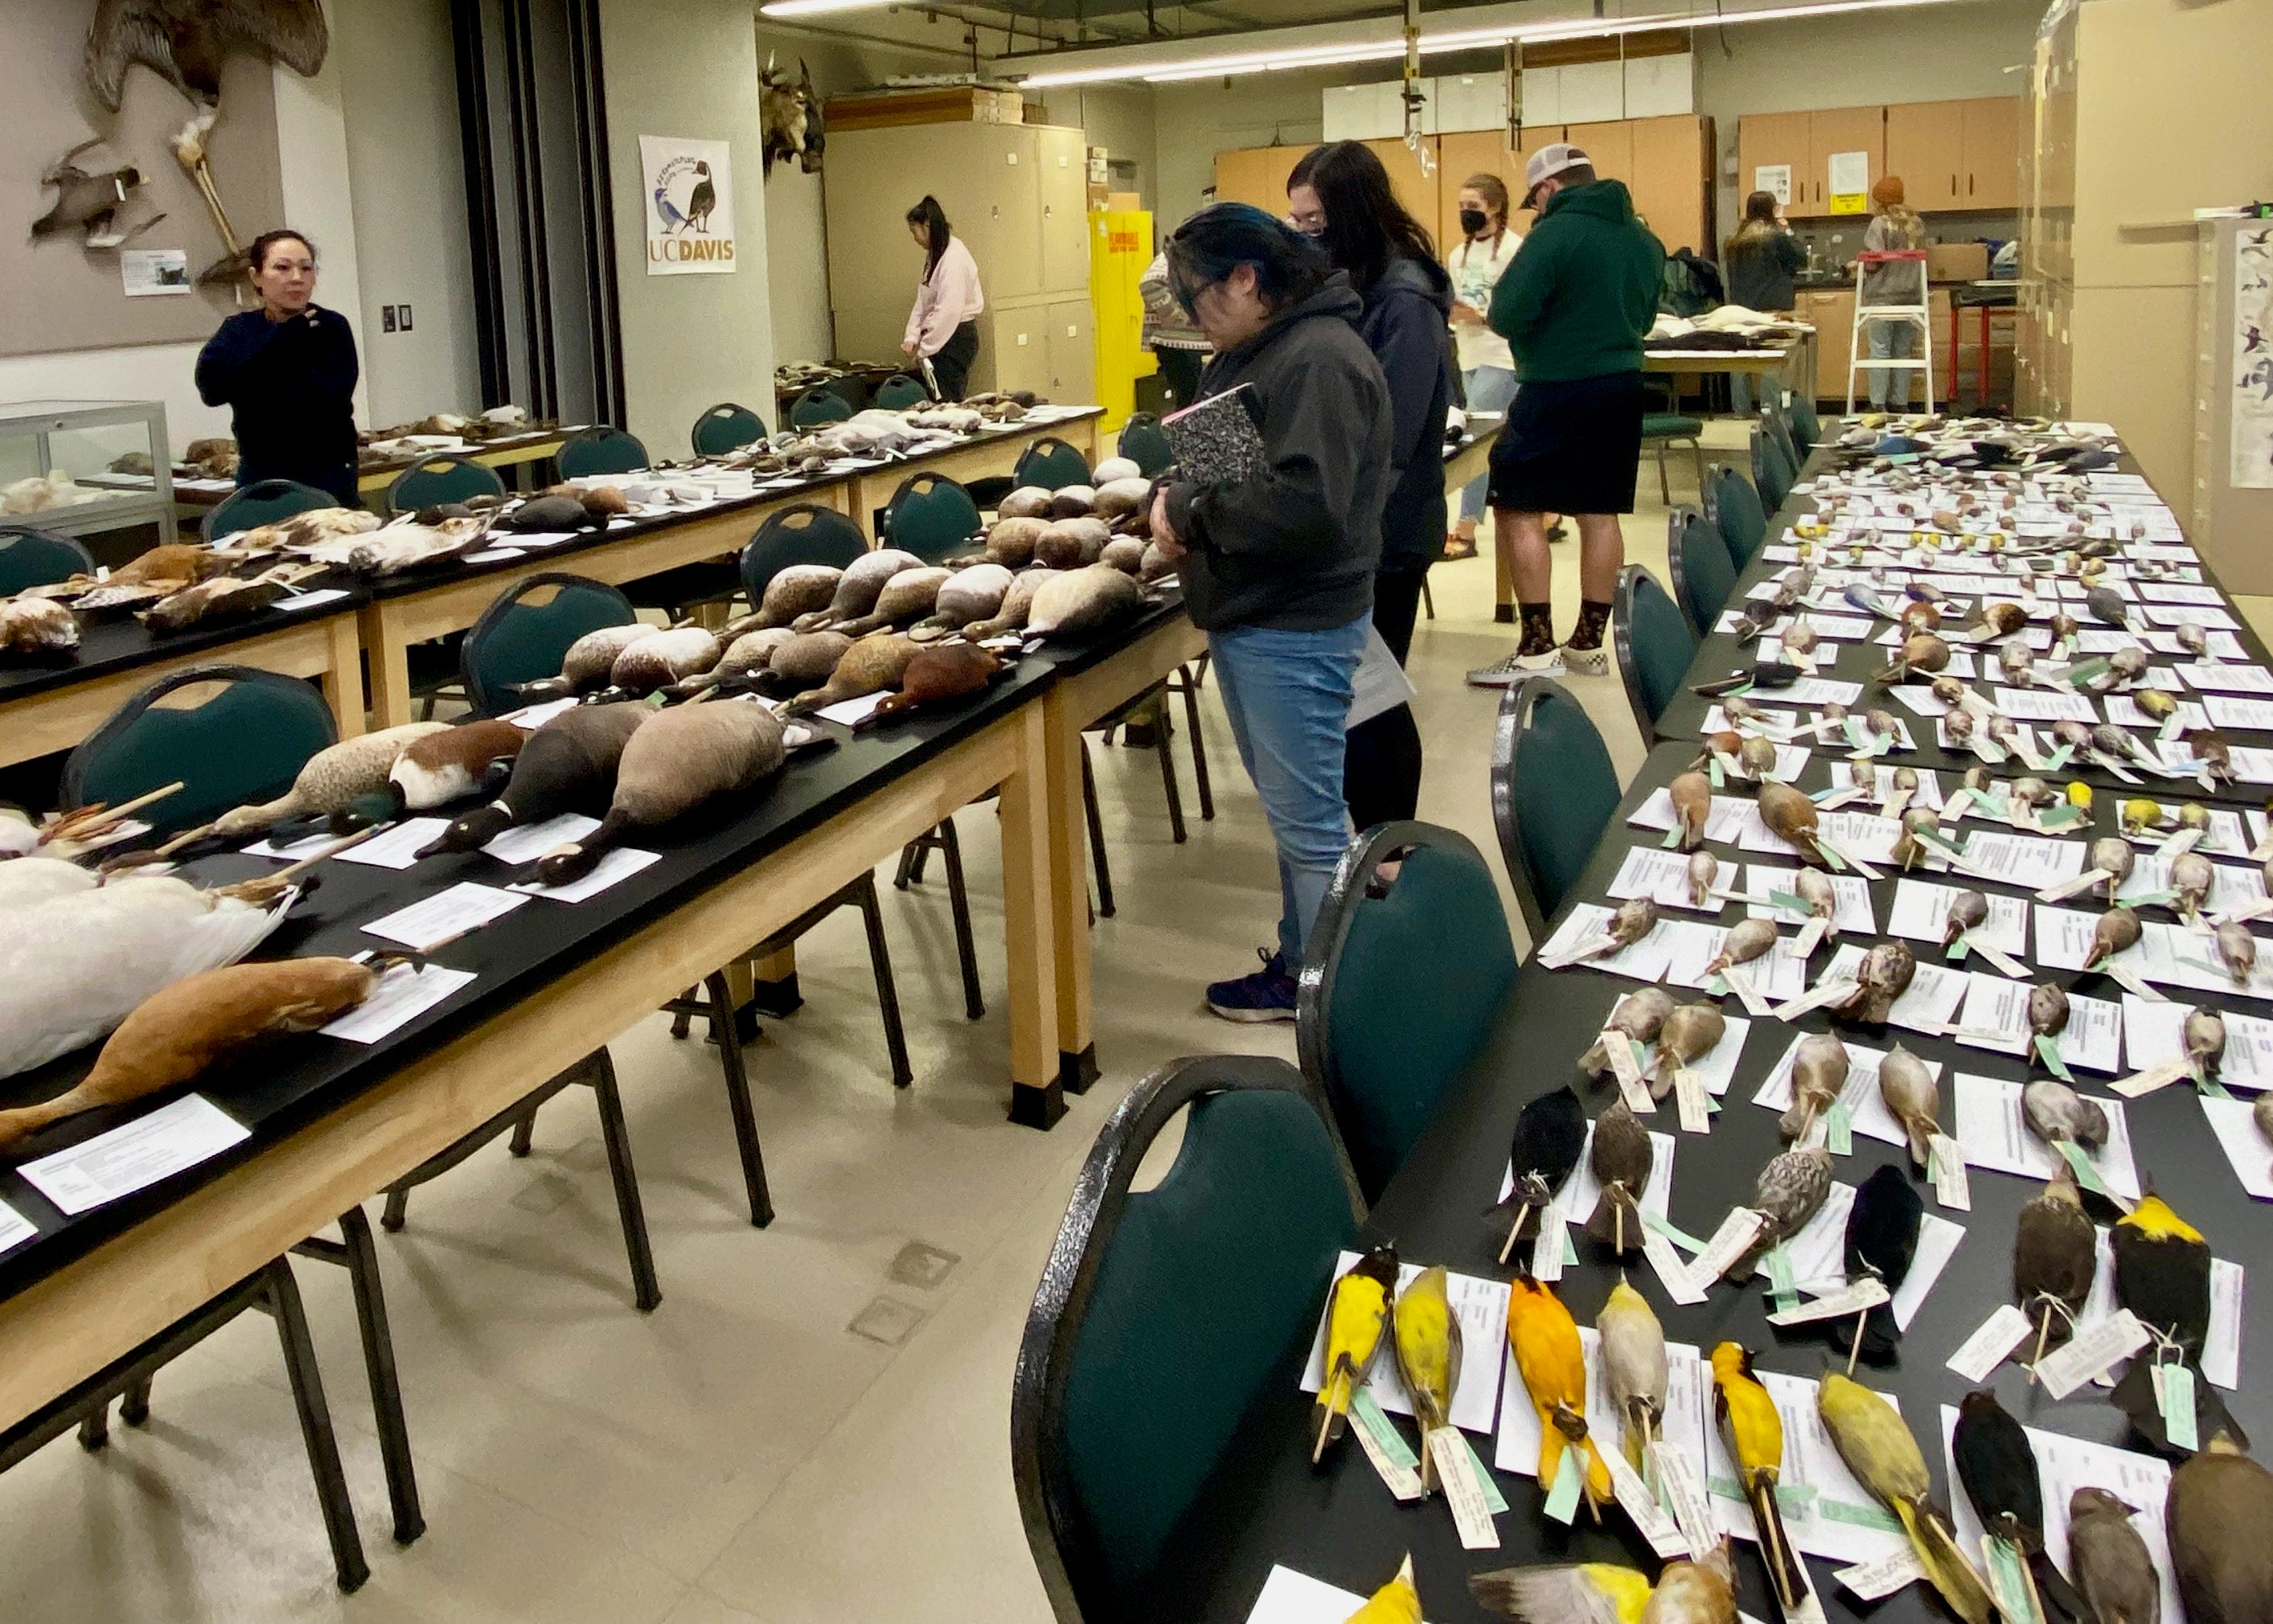 Bird specimens line tables of classroom as students study them